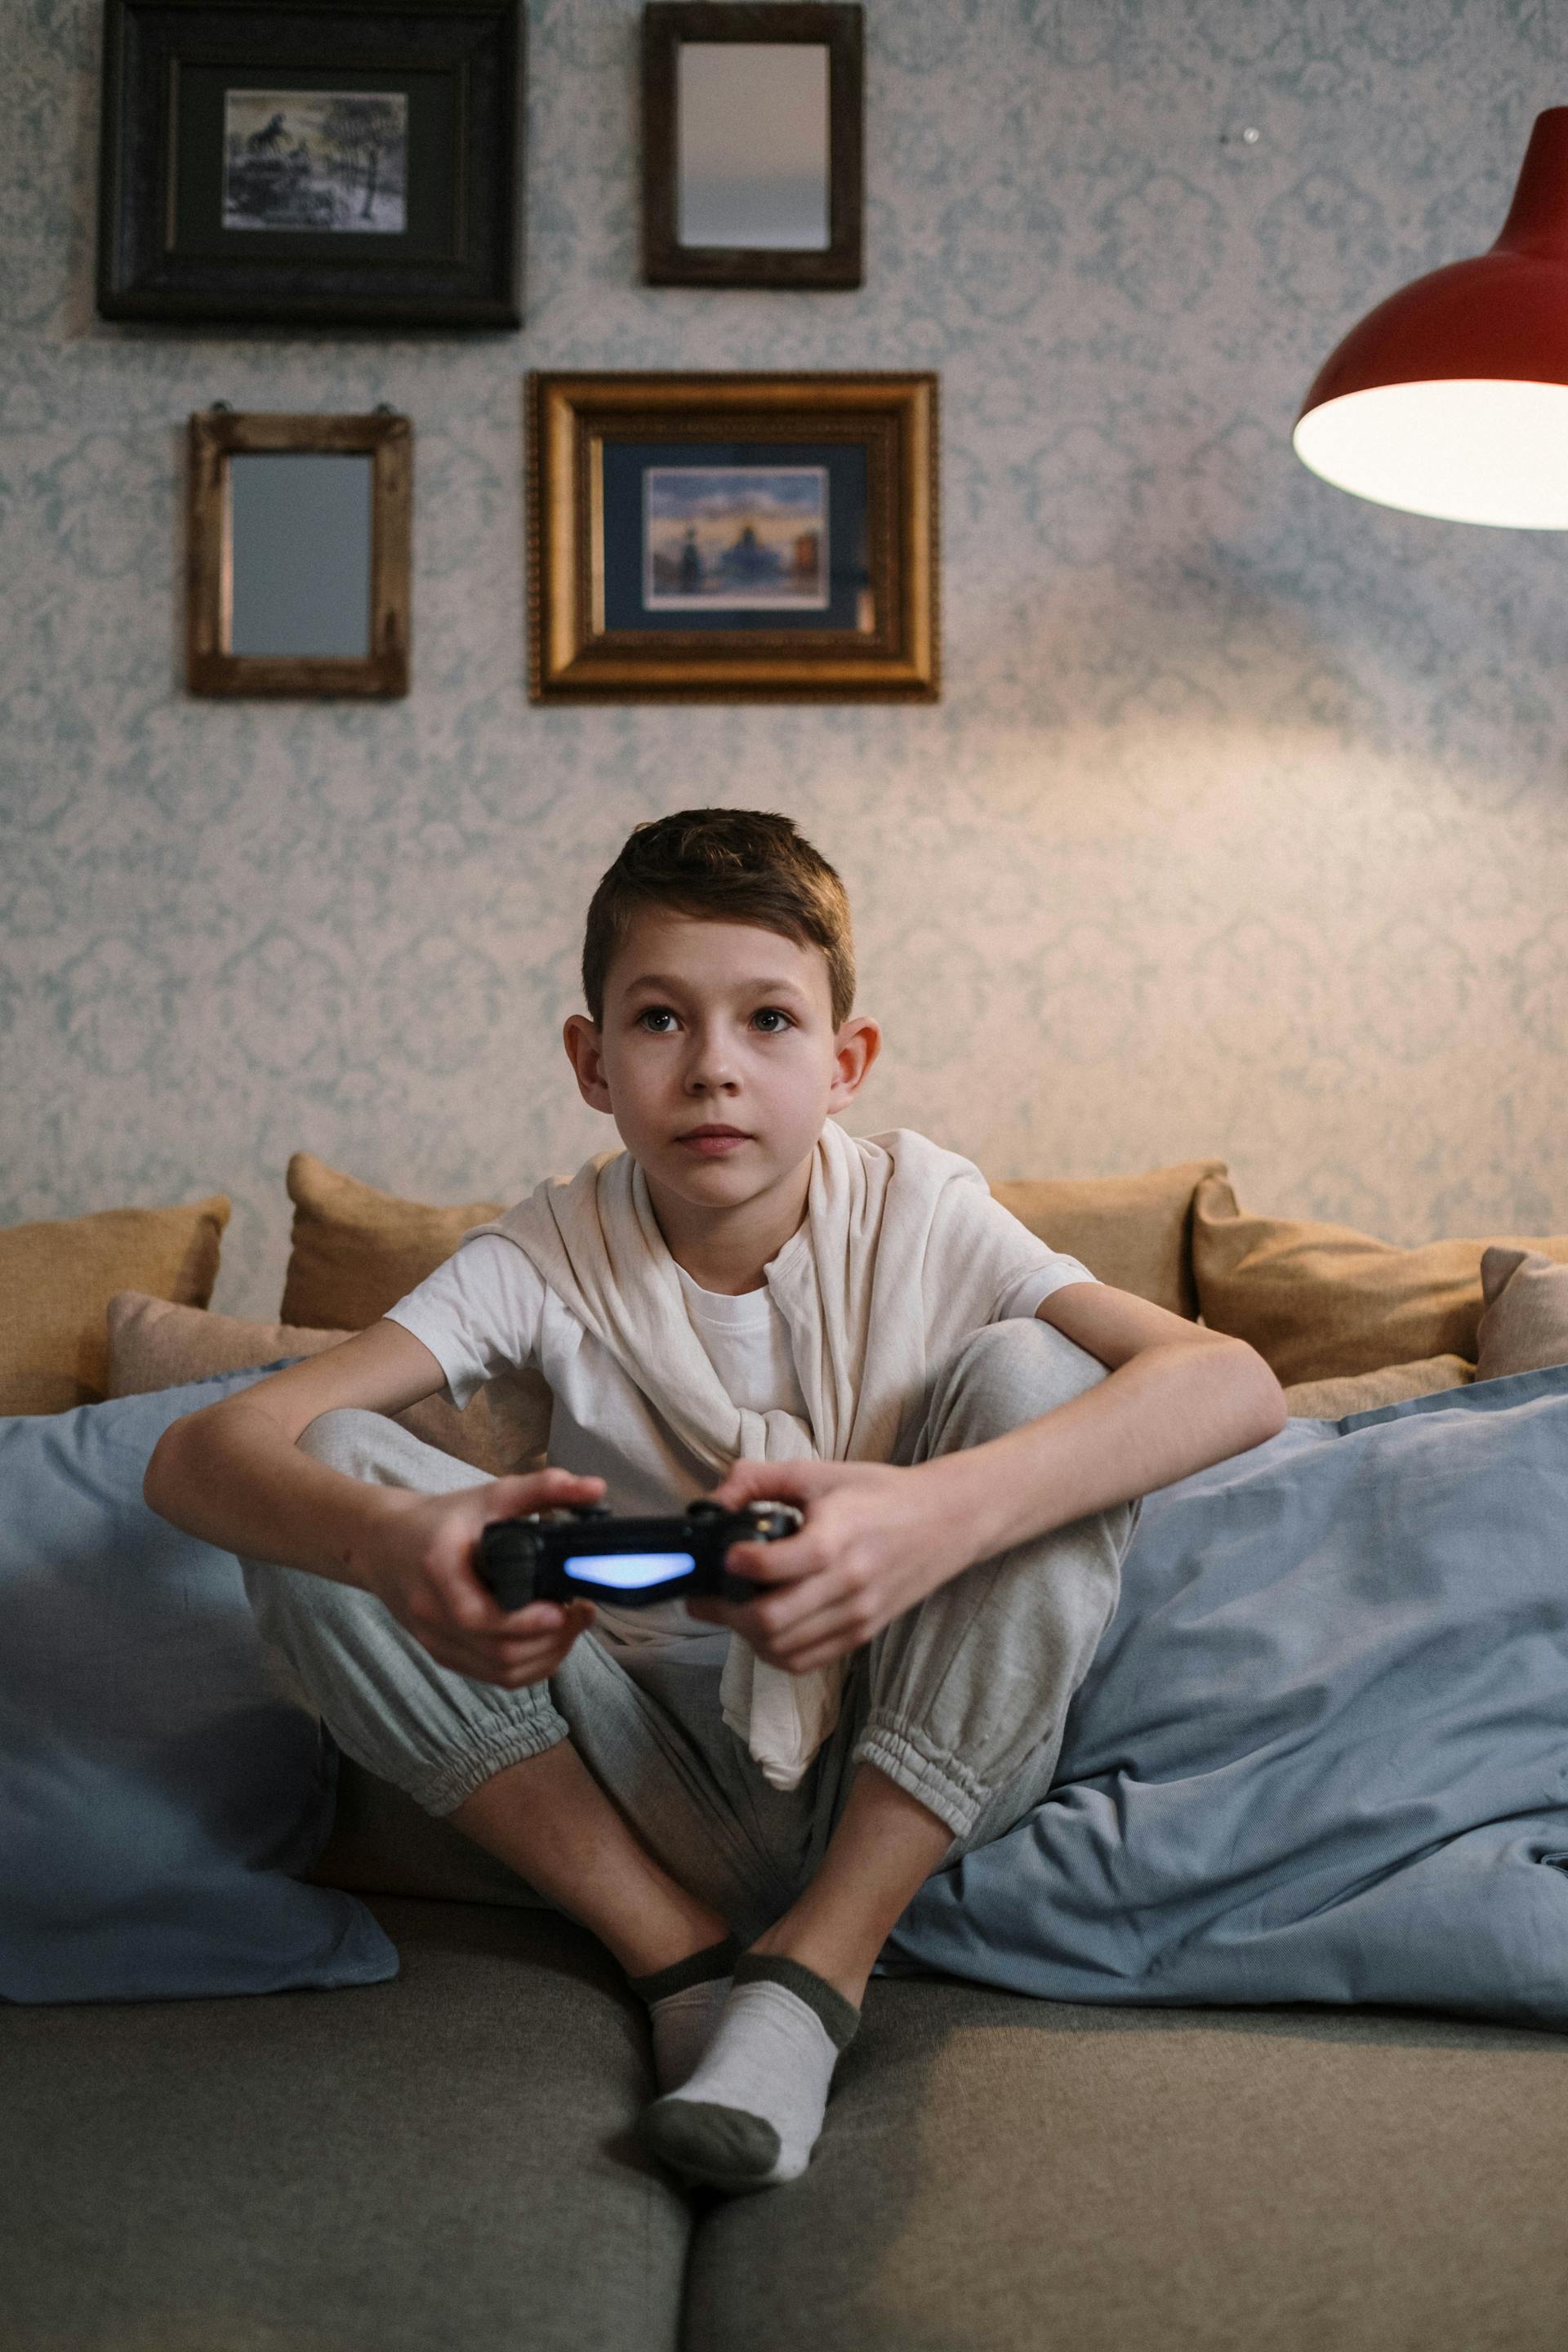 A boy holding a game console | Source: Pexels